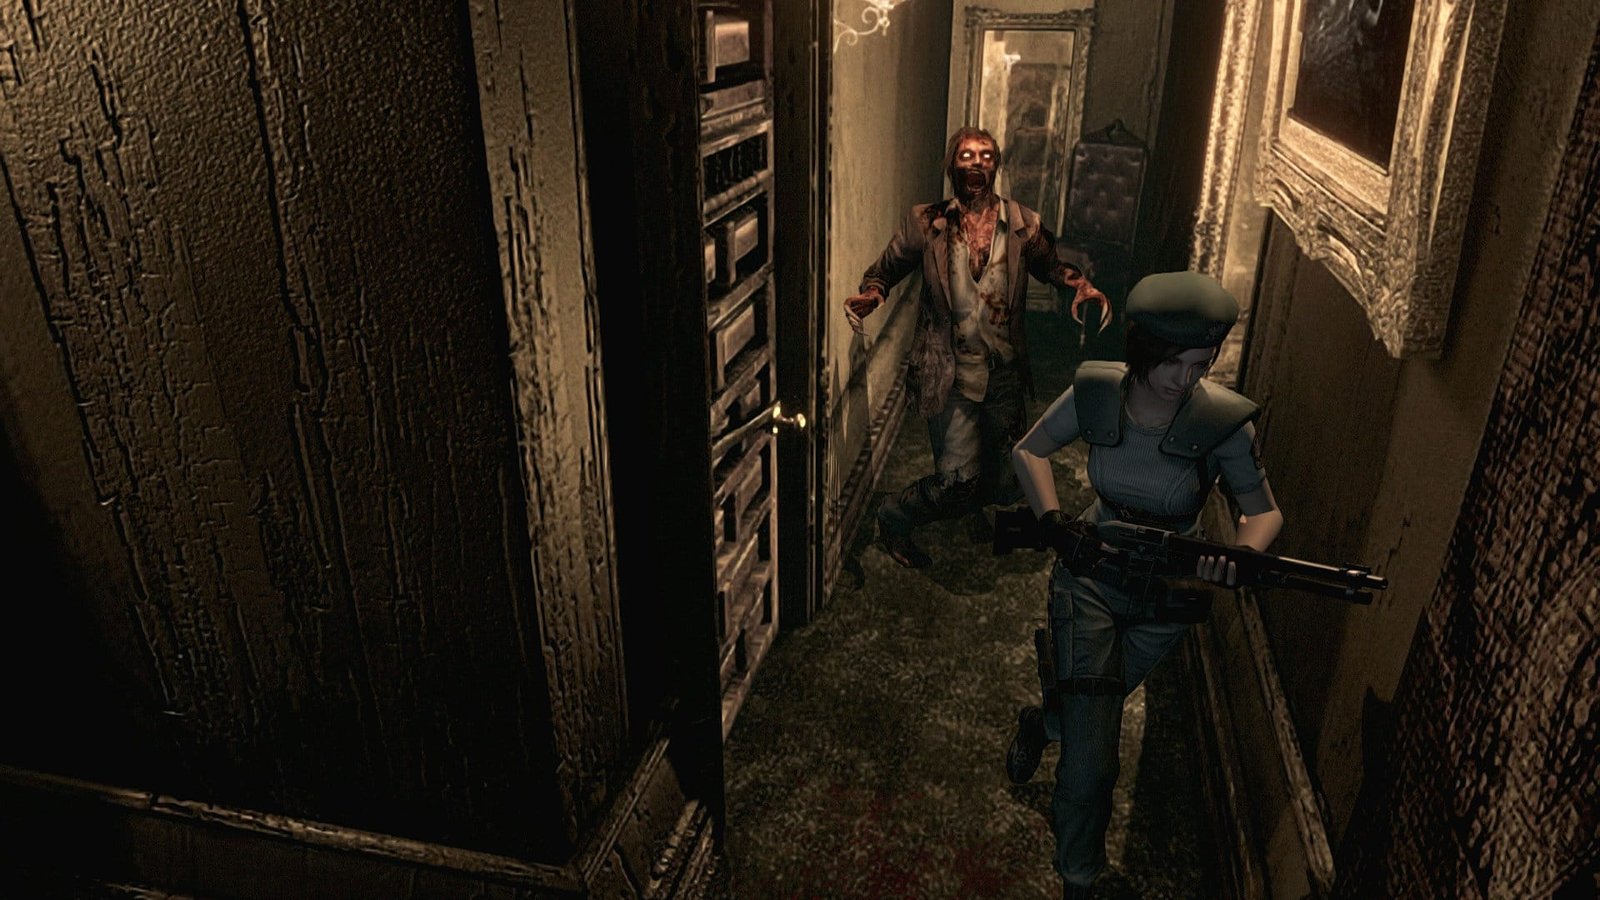 What will the resident evil tv series be like?